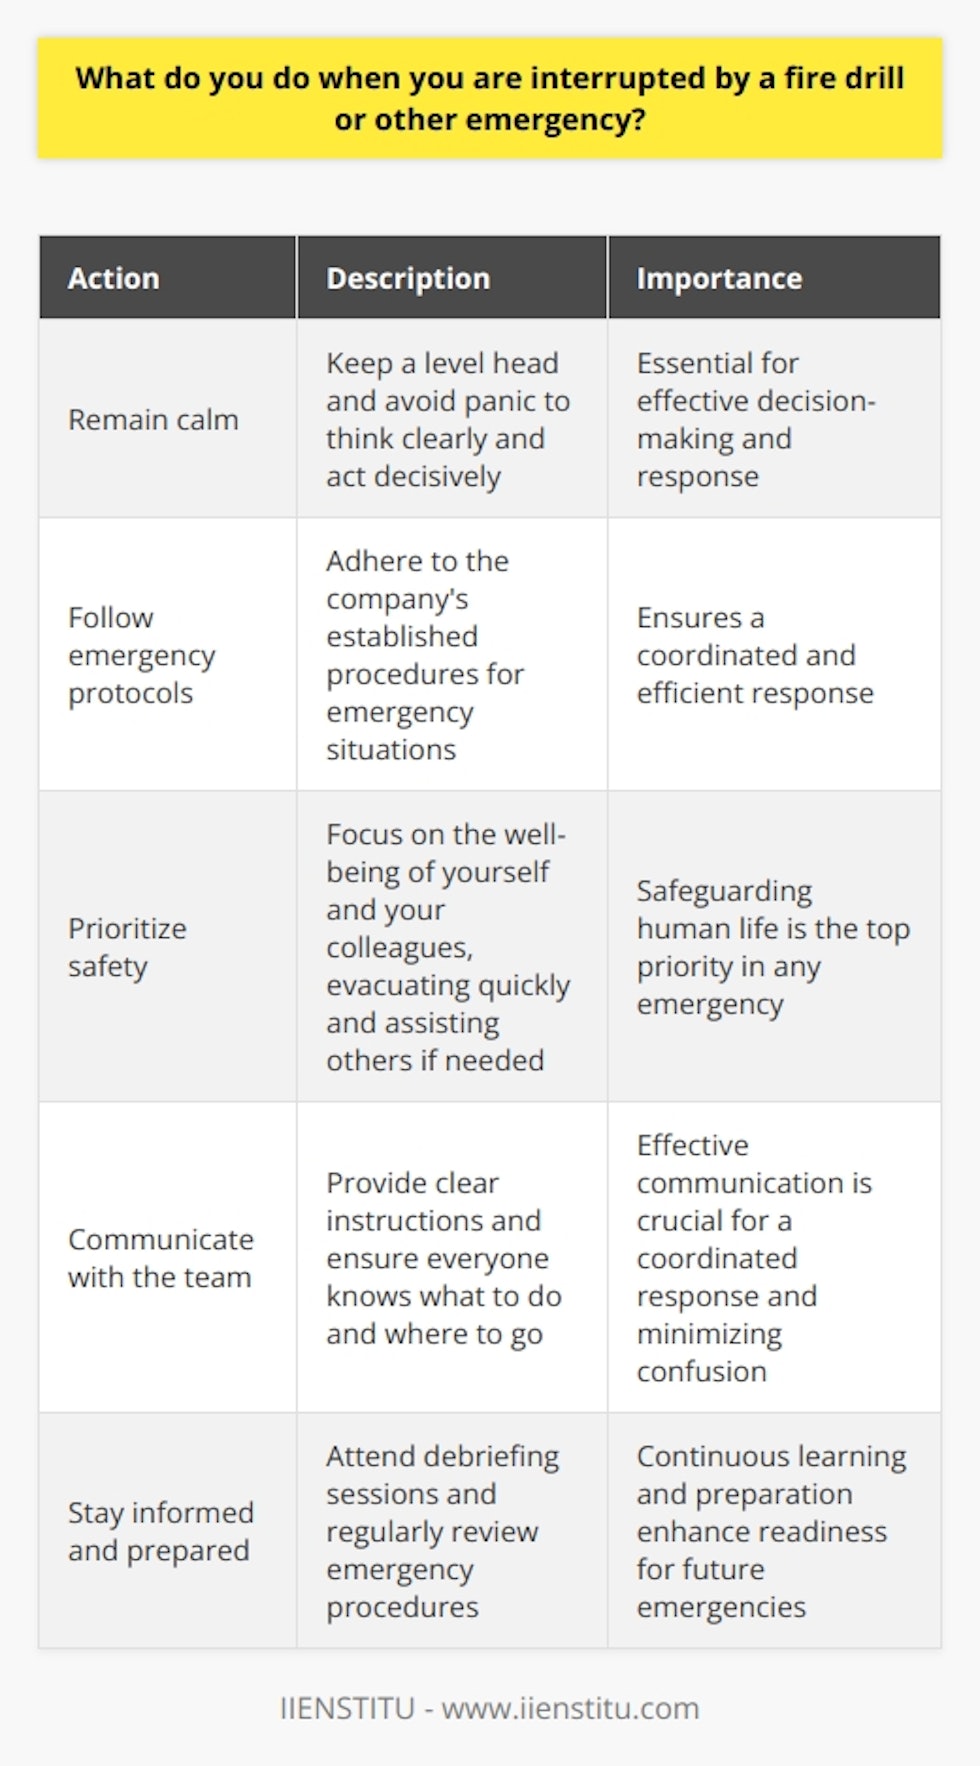 When faced with a fire drill or other emergency at work, the first thing I do is remain calm. Its essential to keep a level head and avoid panic, as this helps me think clearly and act decisively. Once Ive assessed the situation, I follow the companys emergency protocols to the letter. Prioritizing Safety My top priority is always the safety of myself and my colleagues. If theres an immediate threat, I quickly but calmly evacuate the building using the nearest safe exit. I make sure to assist anyone who needs help along the way, such as coworkers with disabilities or injuries. Communicating with the Team If Im in a leadership role, I take charge of communicating with my team. I provide clear, concise instructions and ensure everyone knows what to do and where to go. If Im not in a leadership position, I follow the instructions of my supervisor or the designated emergency response team. Accountability and Headcounts Once outside, I head directly to the designated assembly point. I check in with my supervisor or the person taking headcounts to ensure everyone is accounted for. If someone is missing, I notify the appropriate personnel immediately. Staying Informed and Prepared After the emergency has passed, I attend any debriefing sessions to understand what happened and how we can improve our response in the future. I also make sure to regularly review and practice the companys emergency procedures, so Im always prepared to act quickly and effectively in any situation.